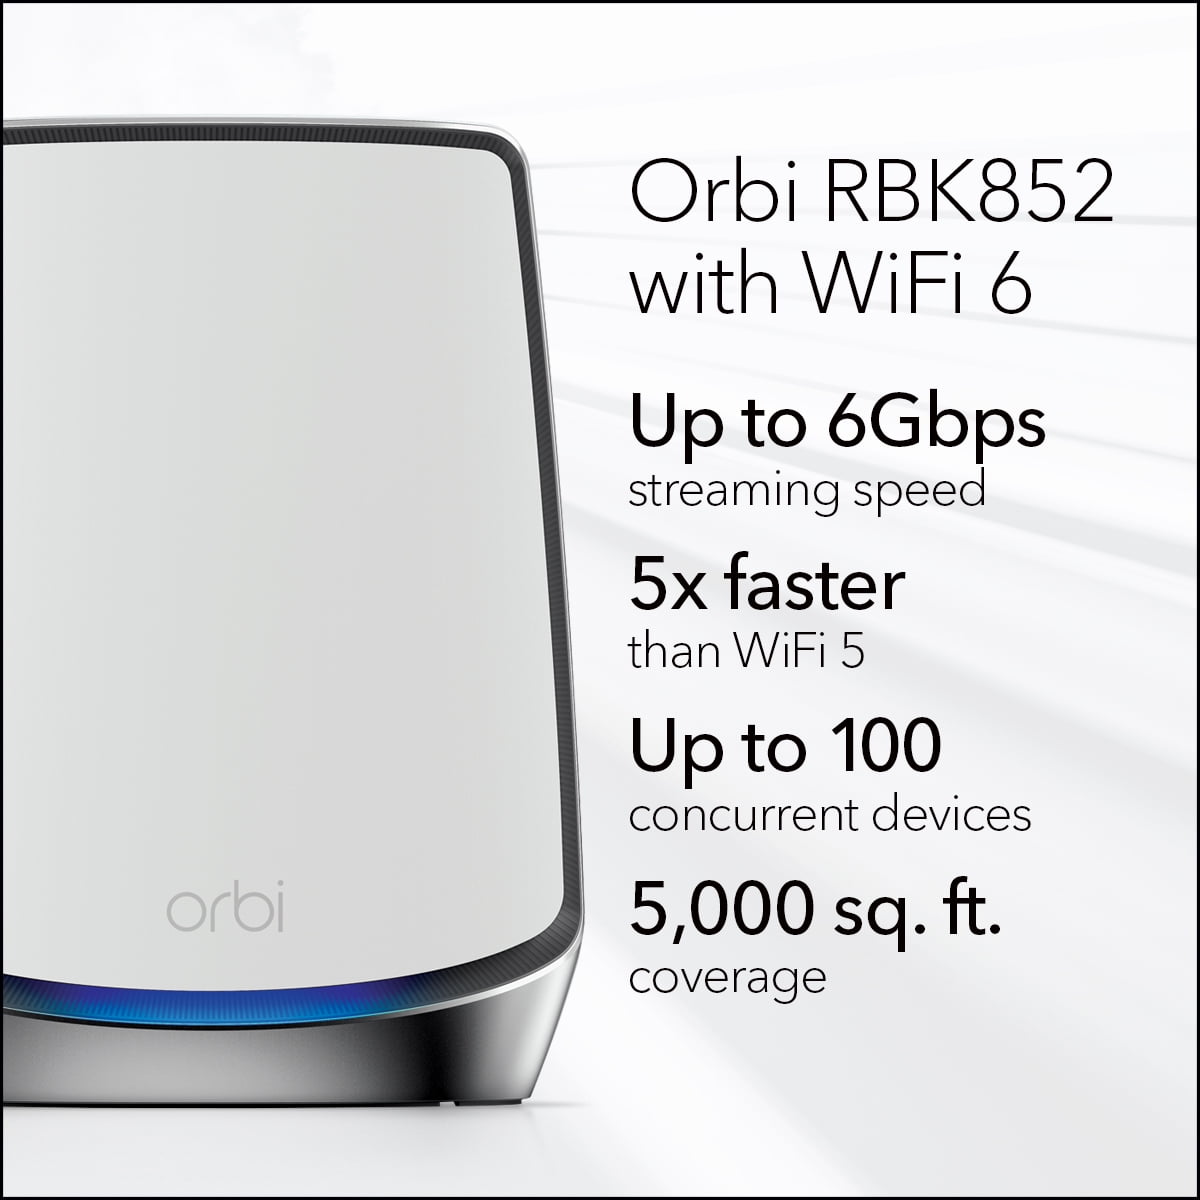 NETGEAR: Networking Products Made For You. Orbi RBK852 Mesh WiFi System -  Tri-band WiFi 6 Mesh System